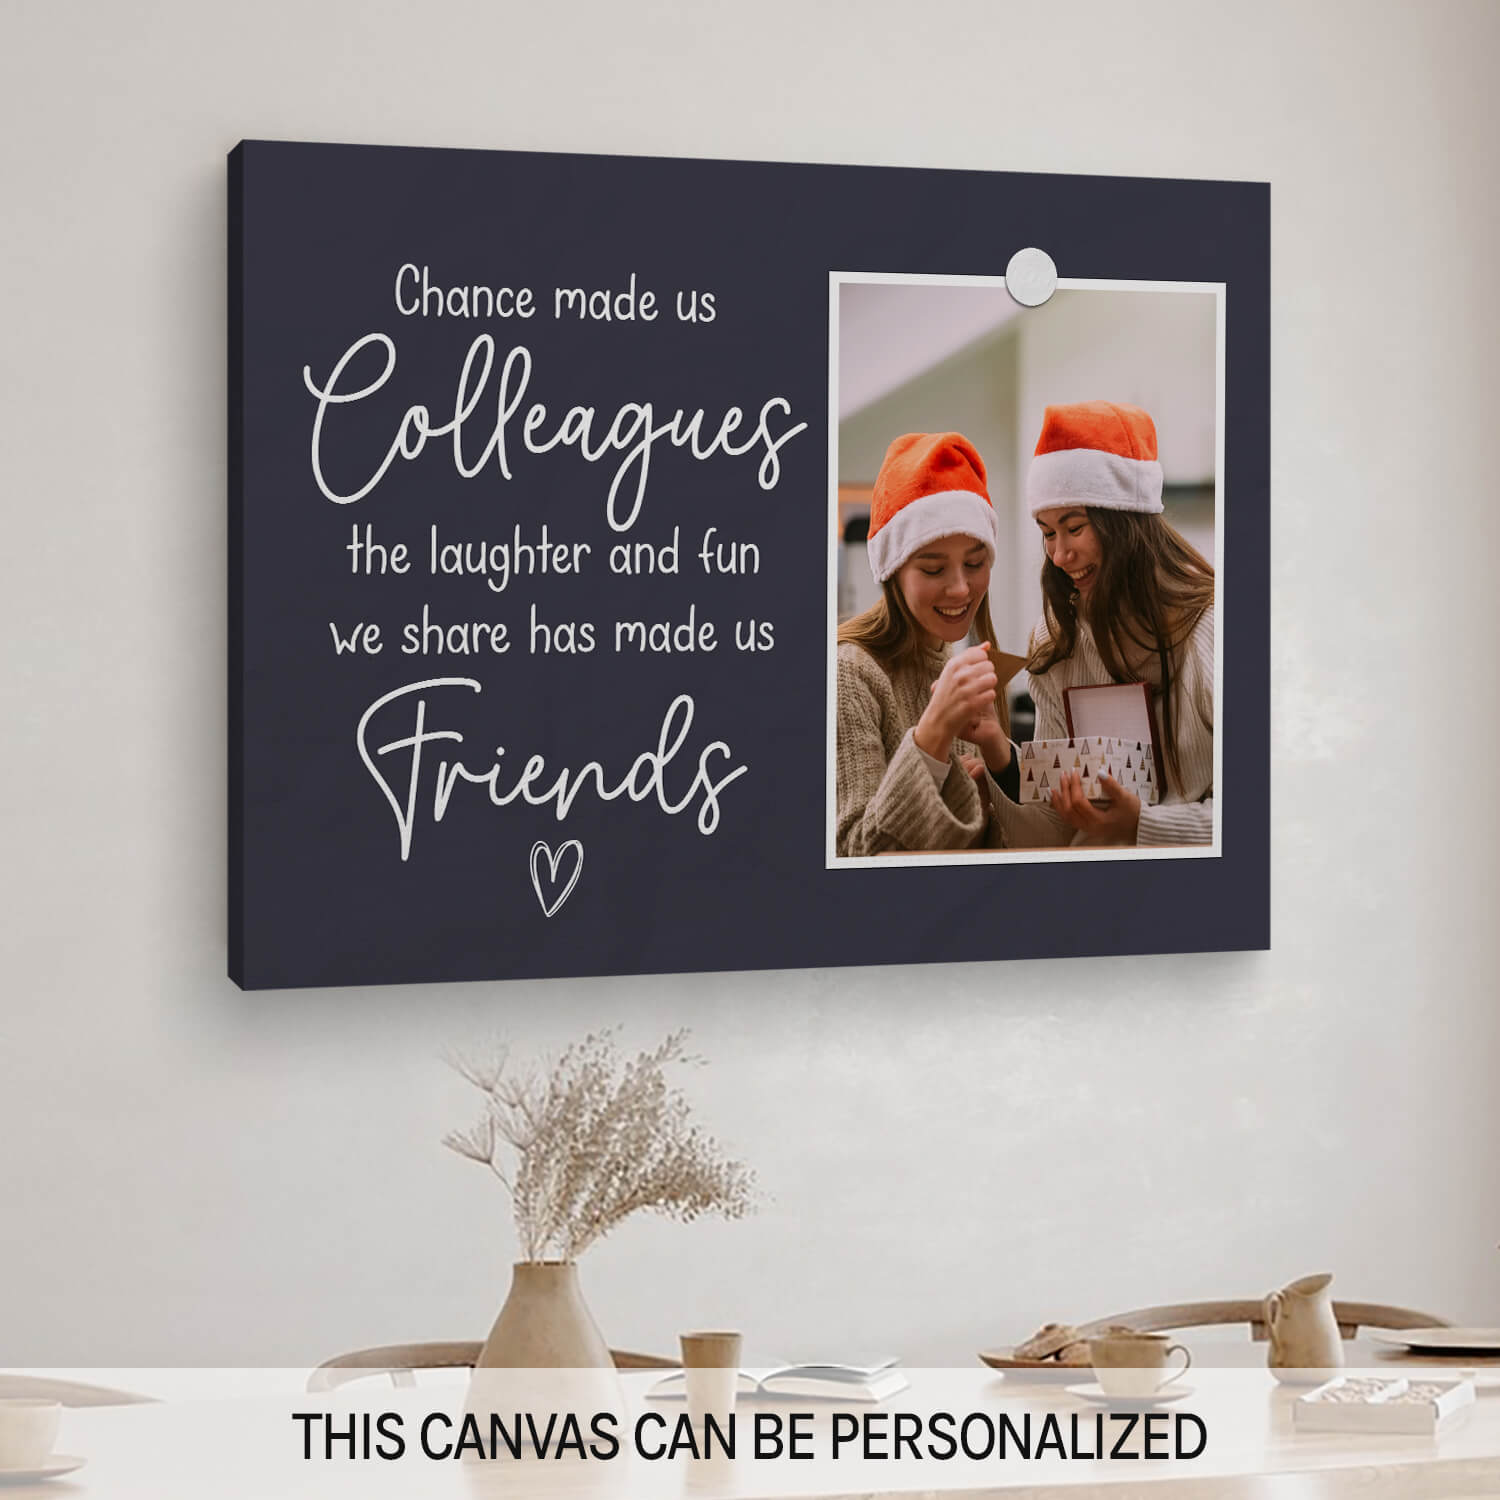 Chance Made Us Colleagues - Personalized Birthday or Christmas gift For Coworker - Custom Canvas Print - MyMindfulGifts